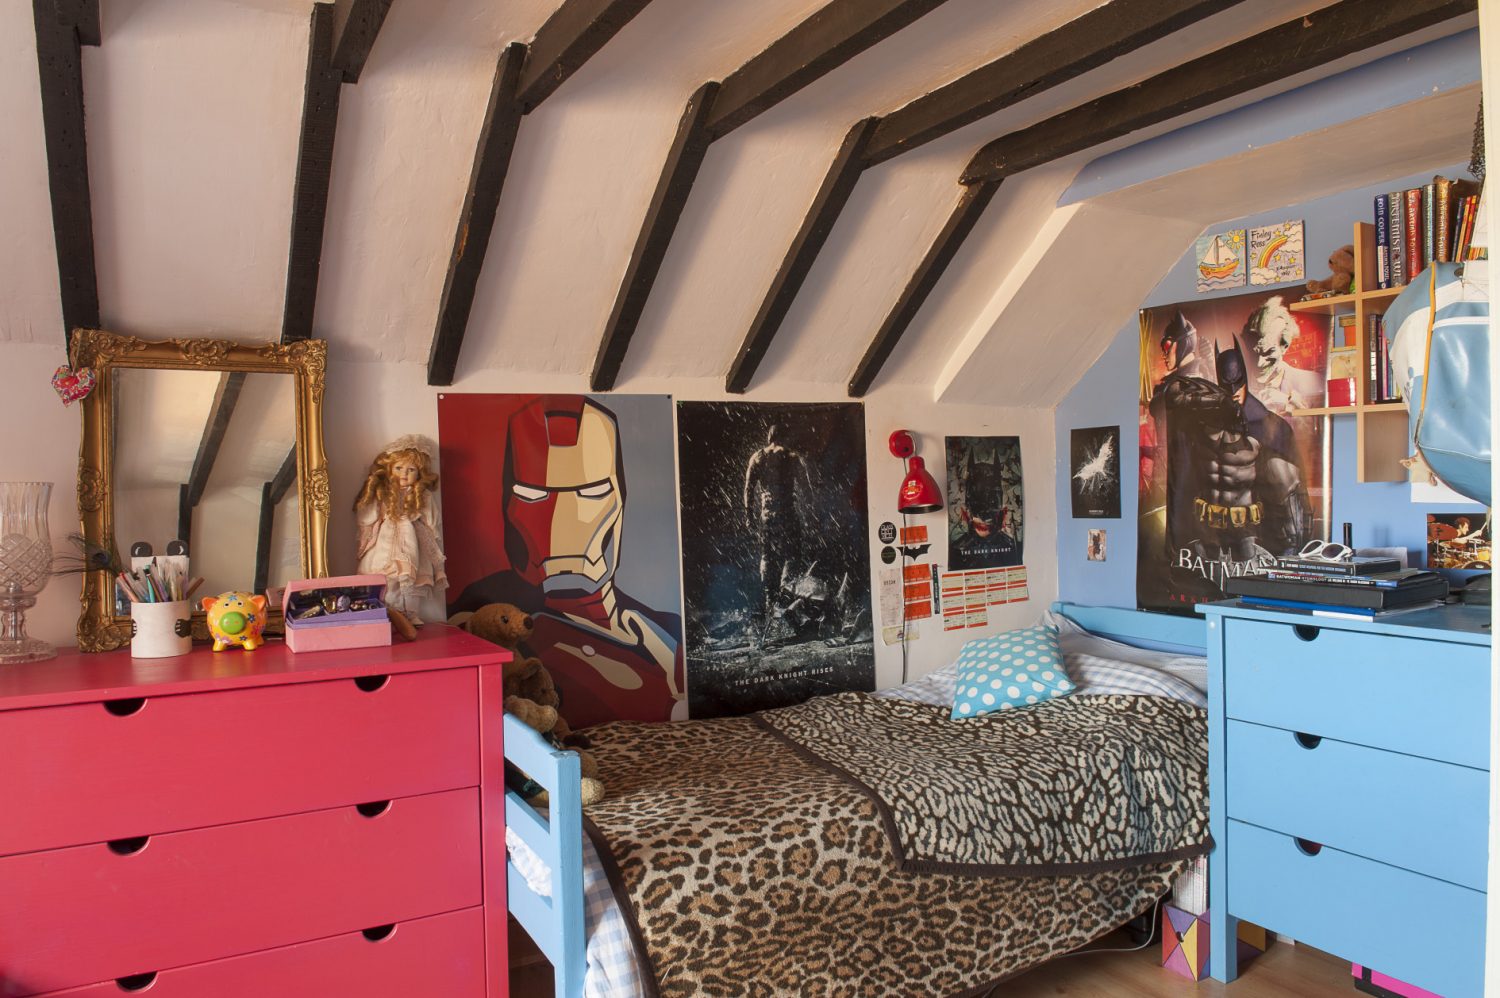 On the top floor with opposing red and blue walls is daughter Amber and son Finlay’s bedroom